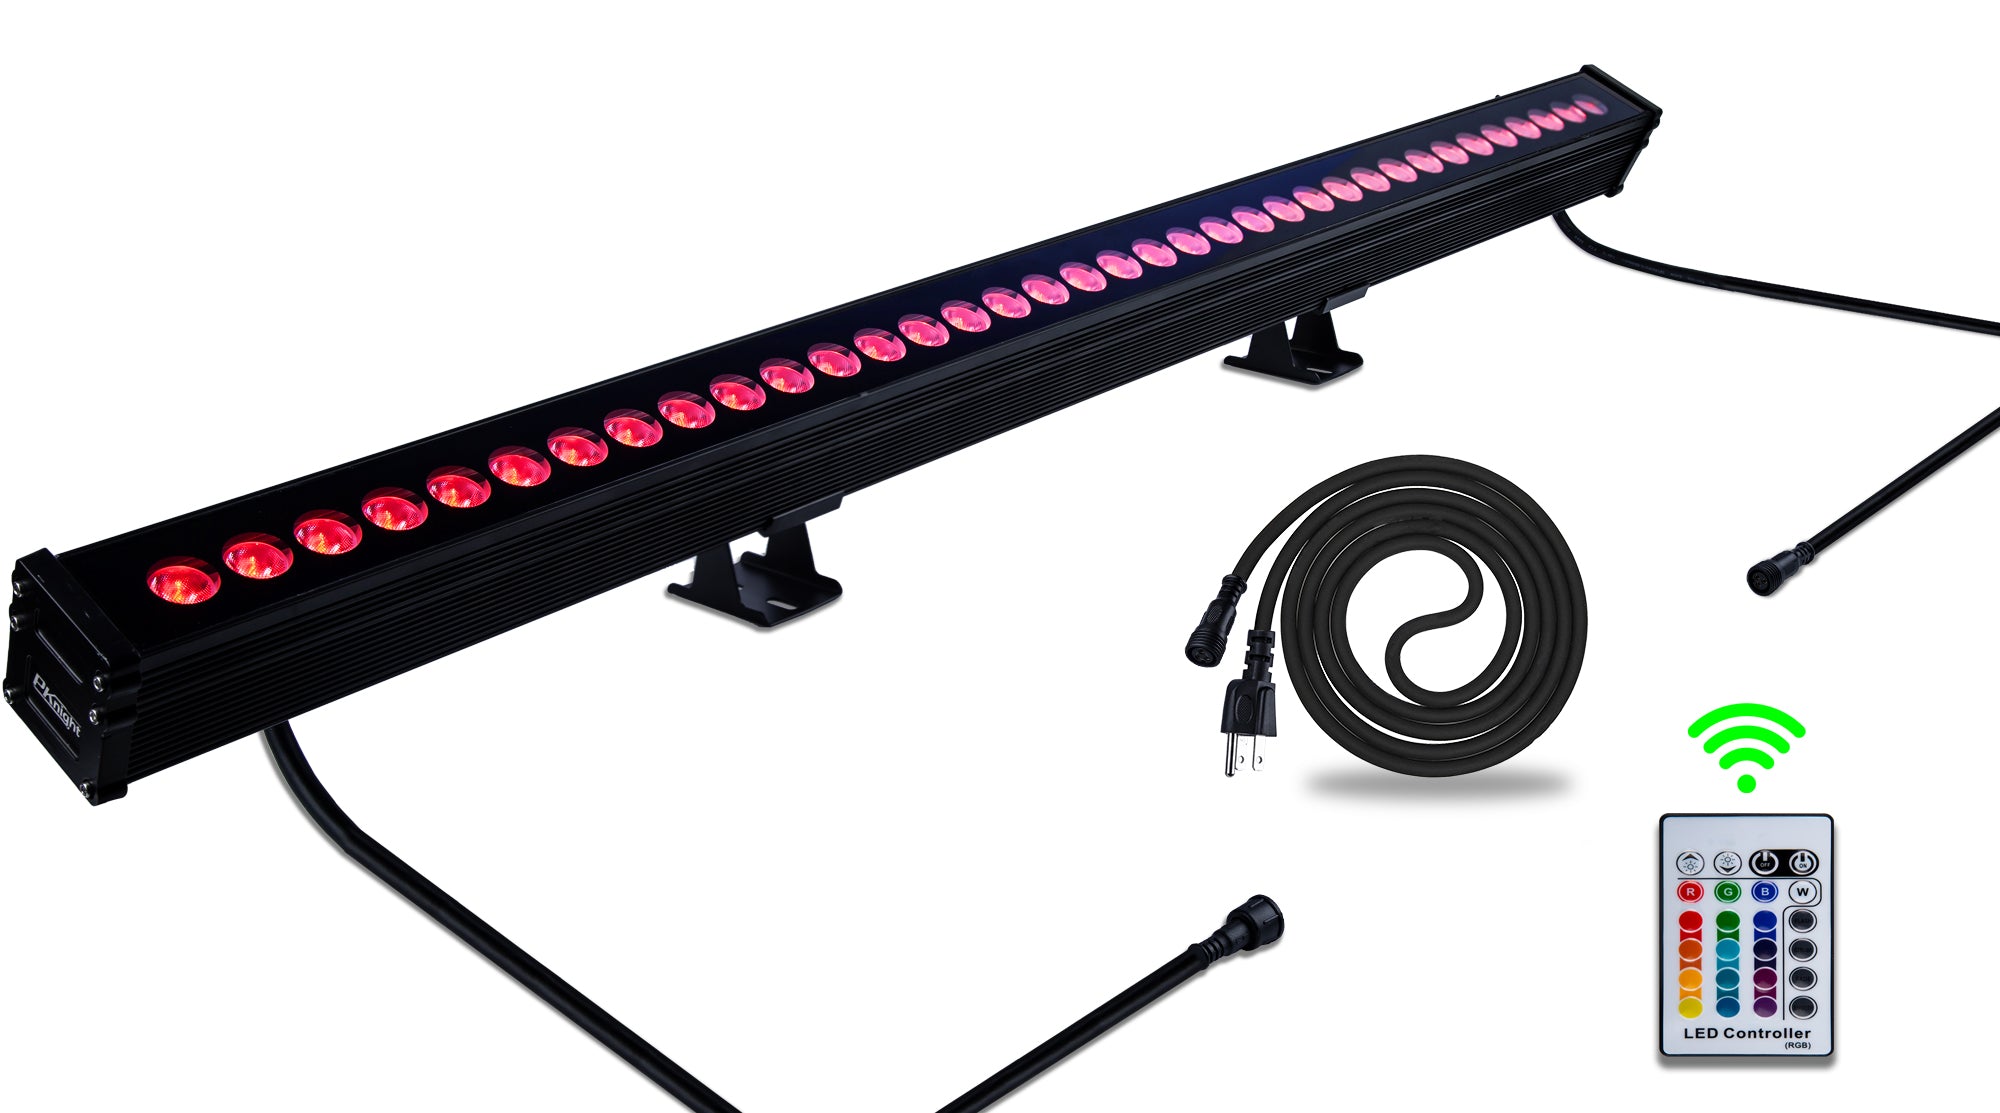 Pknight Led Linear Wall Washer Lighting Bar,108w RGB Colors Changing and Pure White ,3.2ft/40'' for Outdoor/Indoor,linkable Wall Washer Light Strip Bar for Billboard for Wall,Landscape,Building